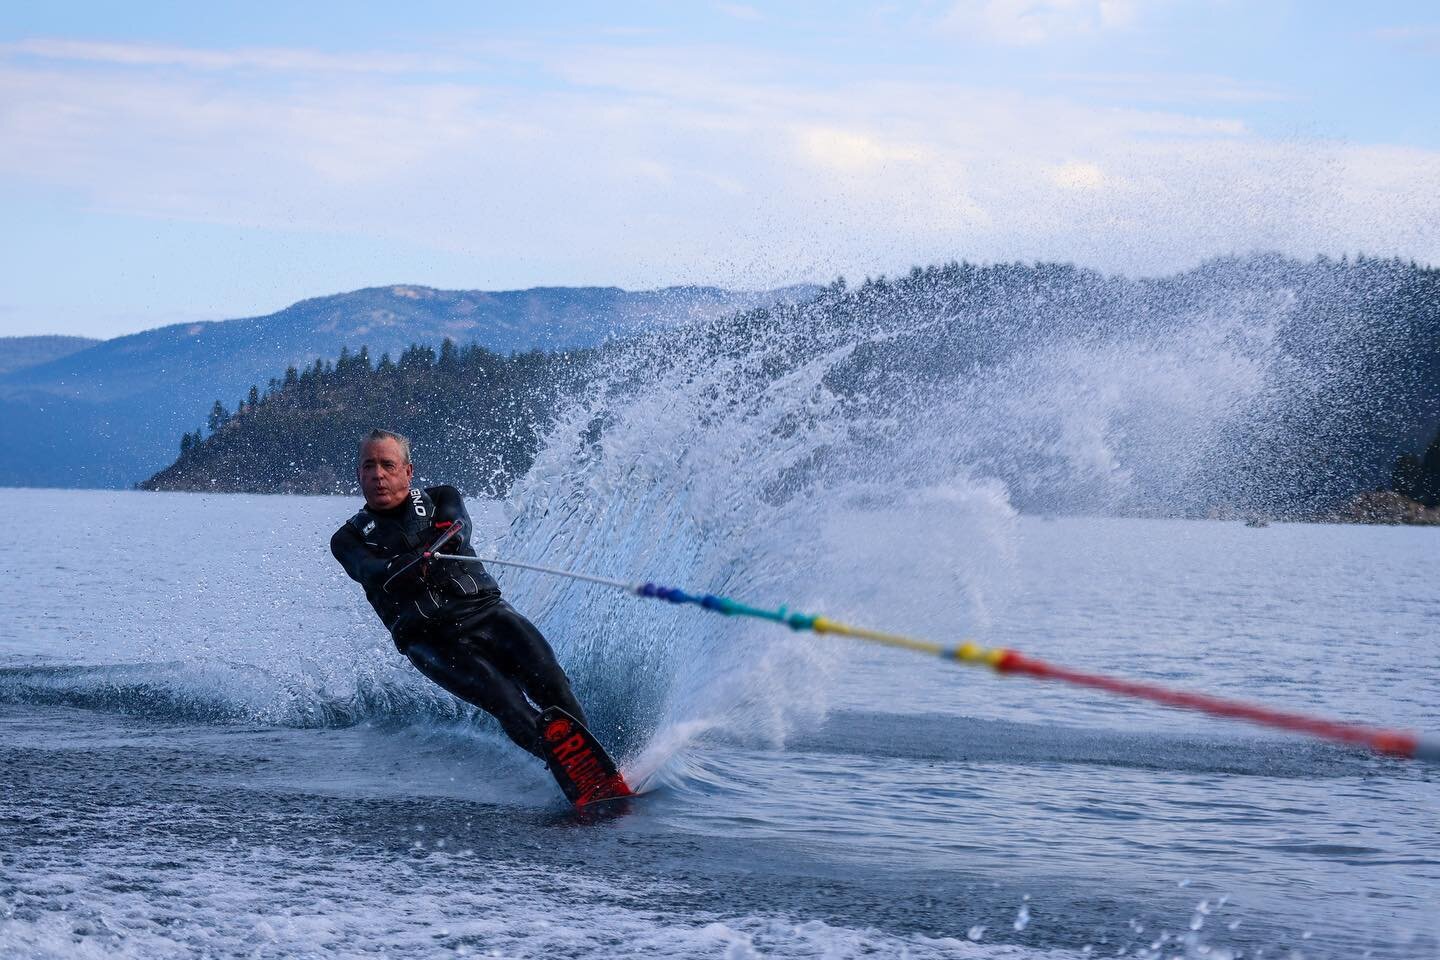 @danhssstruve kicking up some rooster tails to celebrate a good Labor Day weekend. 

#kjswatersports #slalomskiing #roostertail #havefun #laketahoe